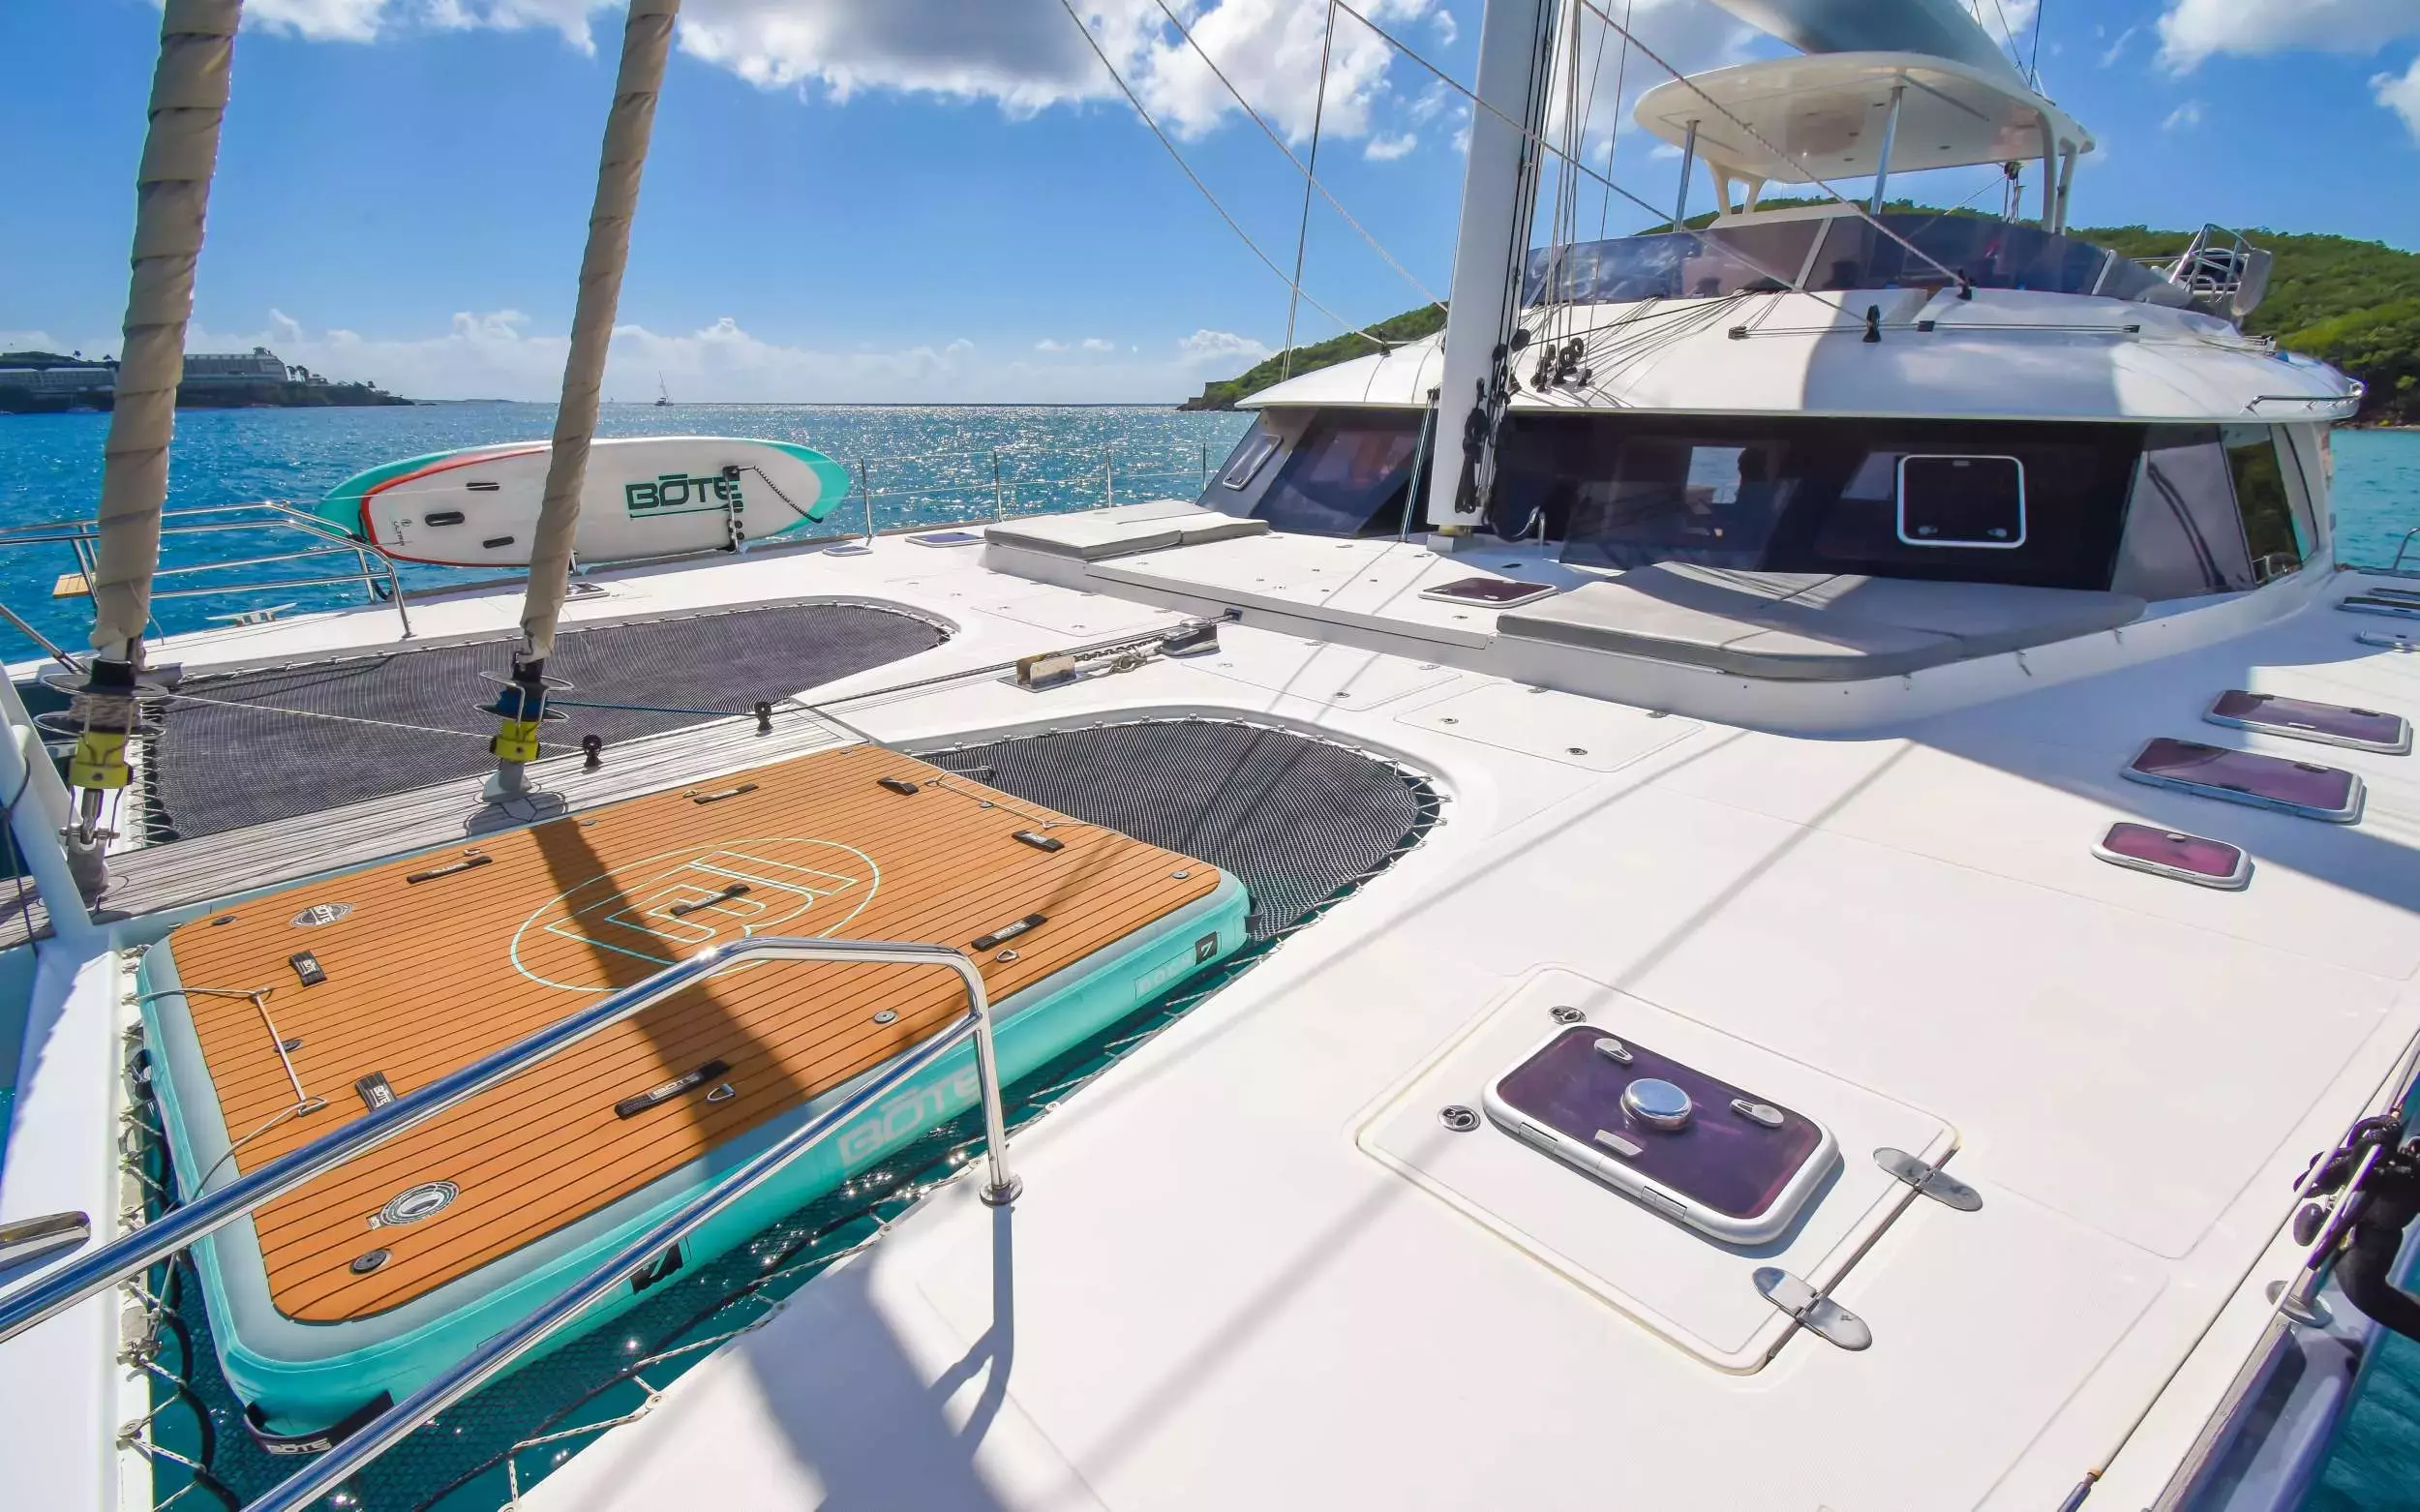 Excess by Sunreef Yachts - Special Offer for a private Luxury Catamaran Charter in St Thomas with a crew